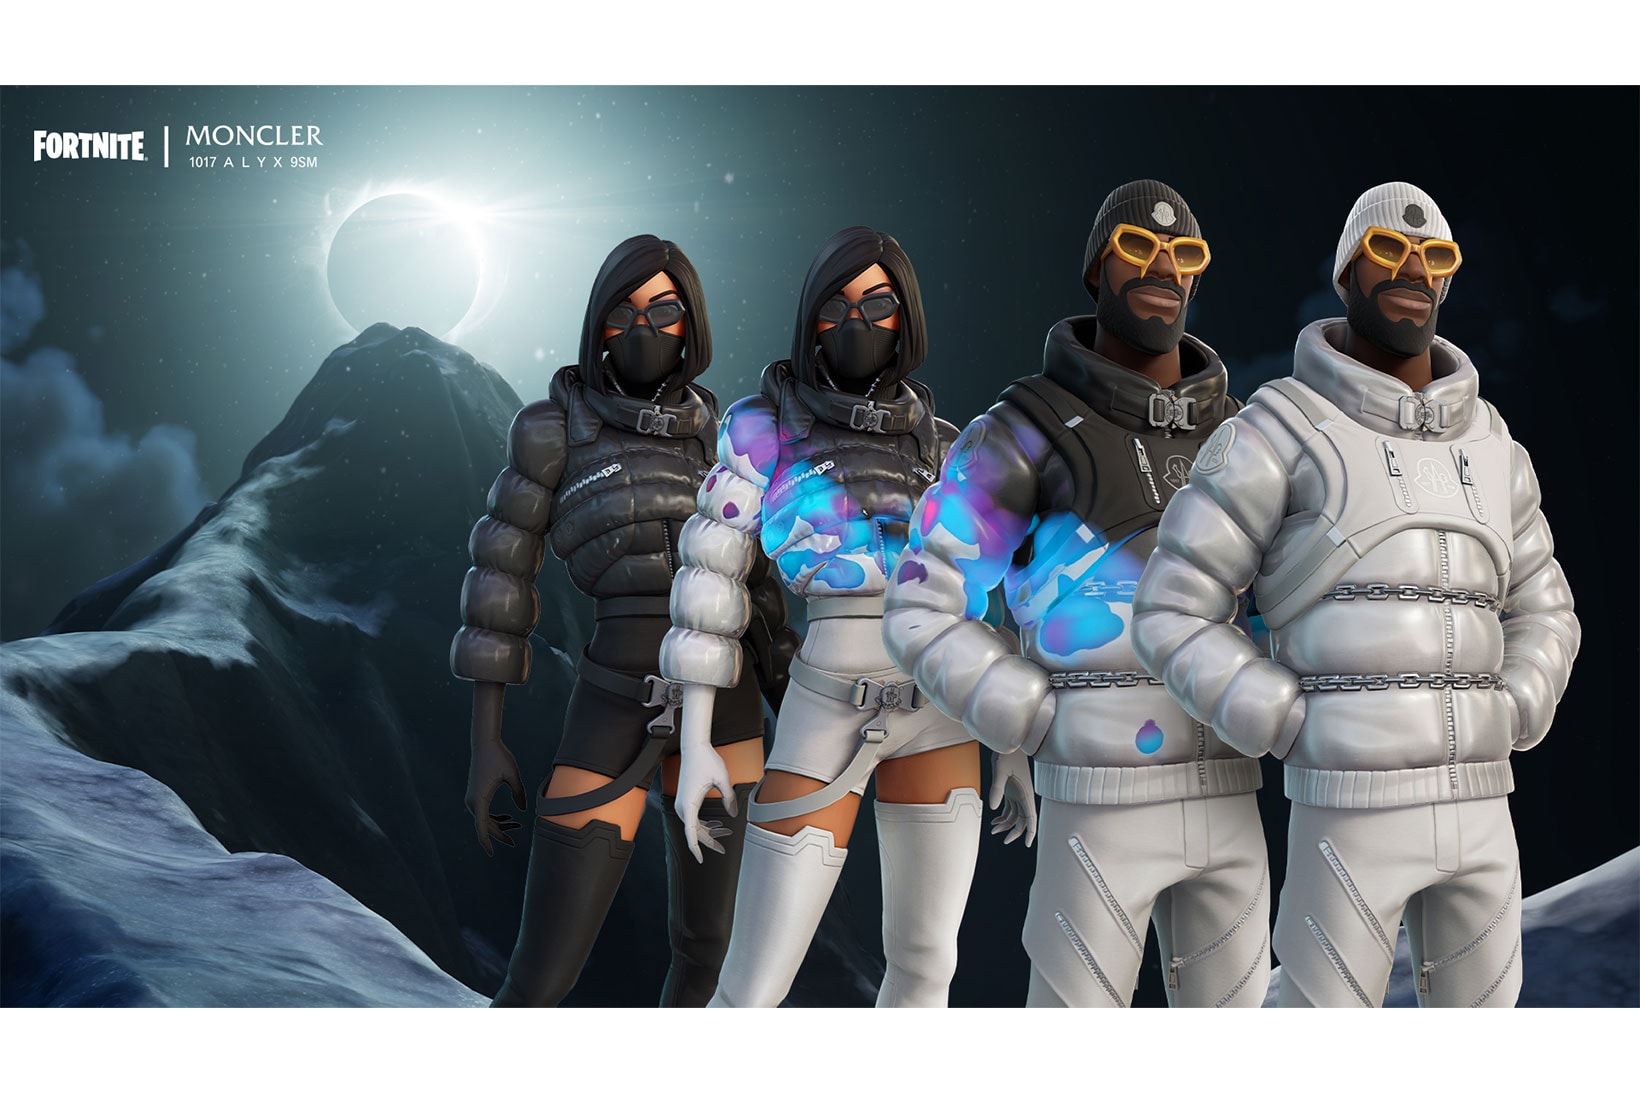 Fortnite 6 MONCLER 1017 ALYX 9SM Collaboration Jackets Outfits Clothing